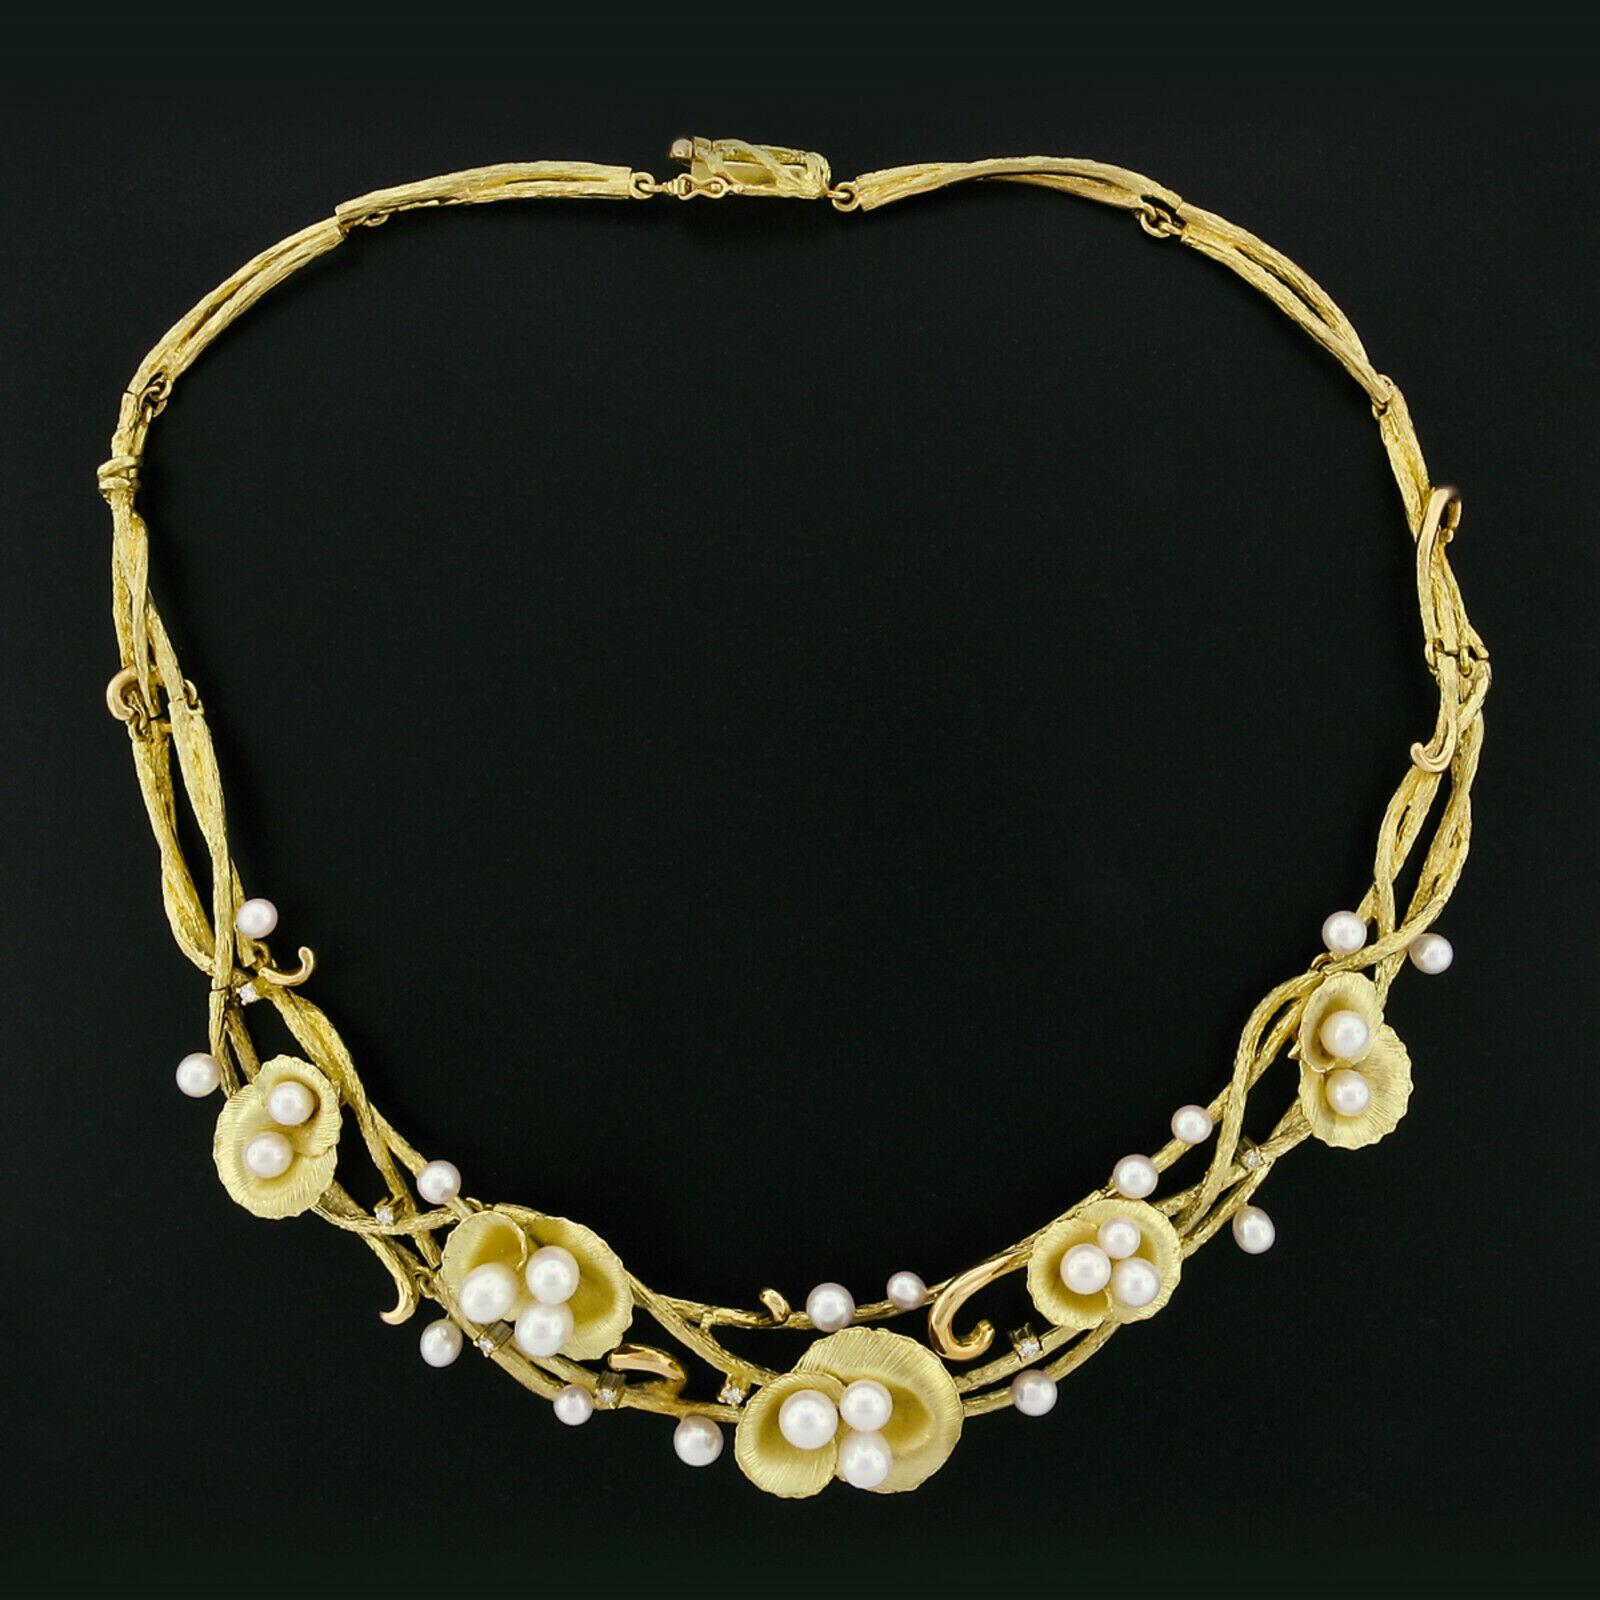 This outstanding statement collier necklace is very finely crafted in solid 18k yellow gold and features uniquely textured branch like links, decorated with beautifully patterned open flowers. The pearls are truly very fine quality pearls offering